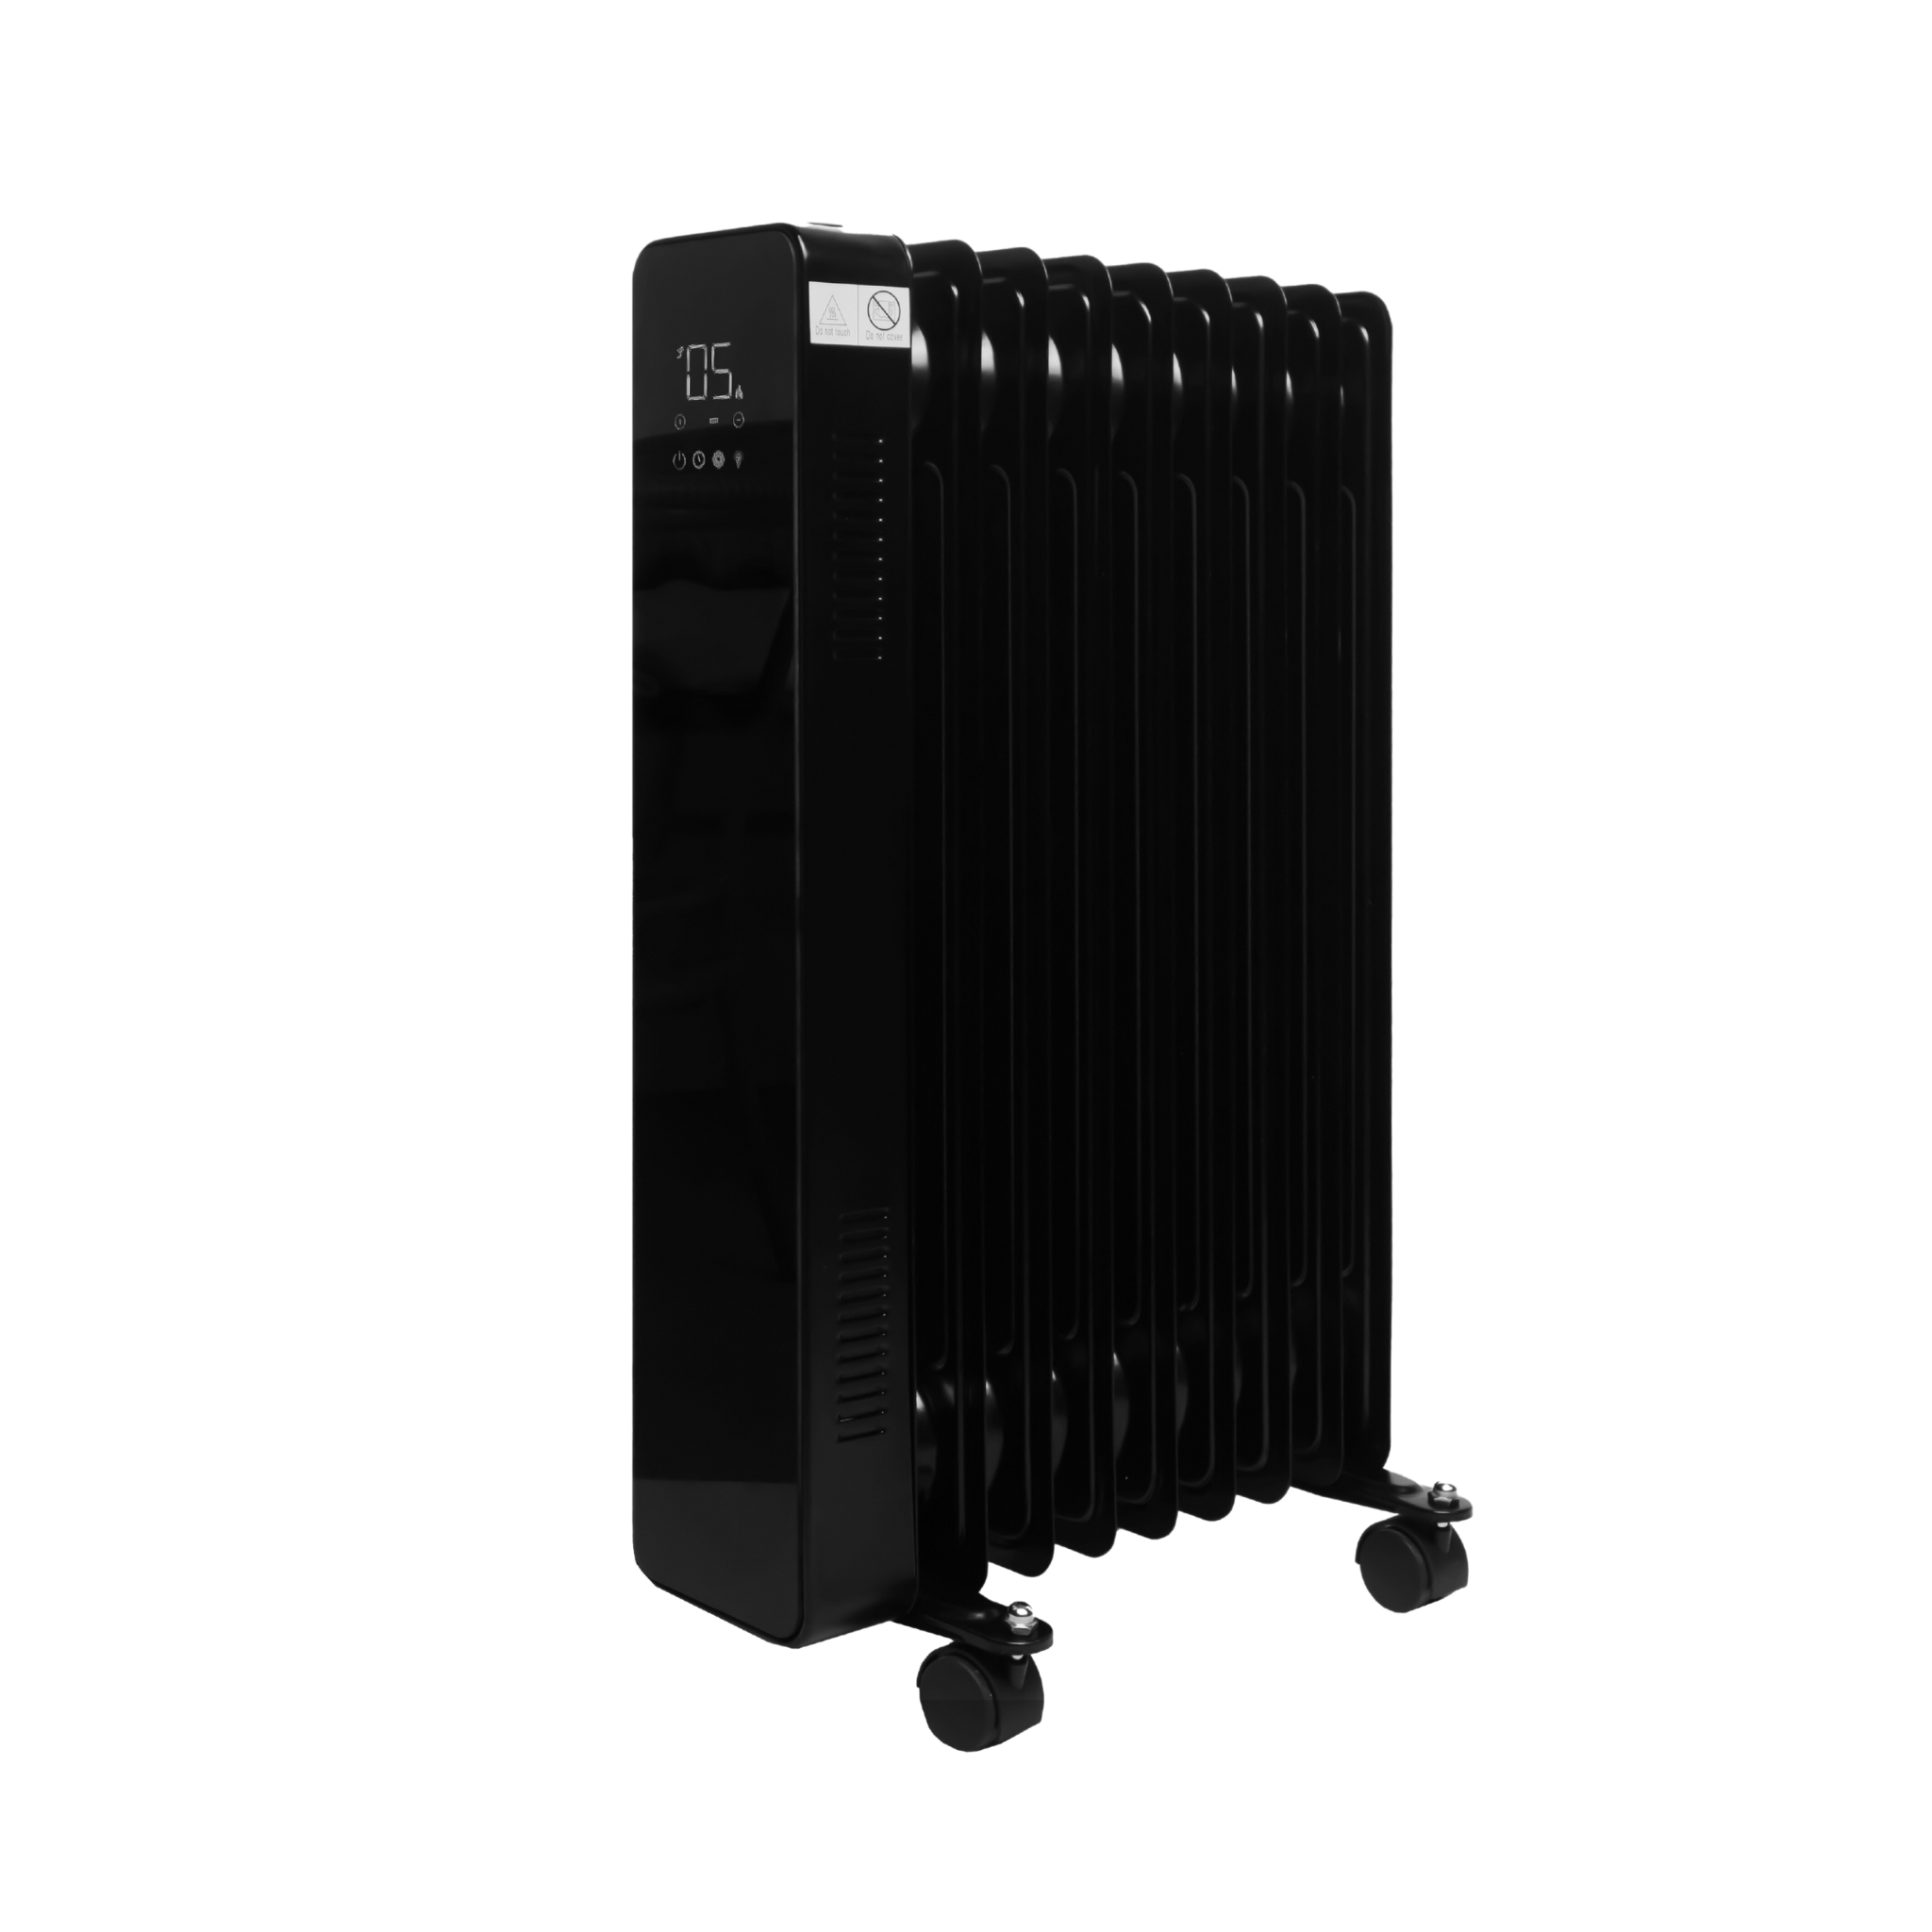 A picture of a Senelux Oil Filled Heater with an all-black metal design and an LED display screen along the larger side.